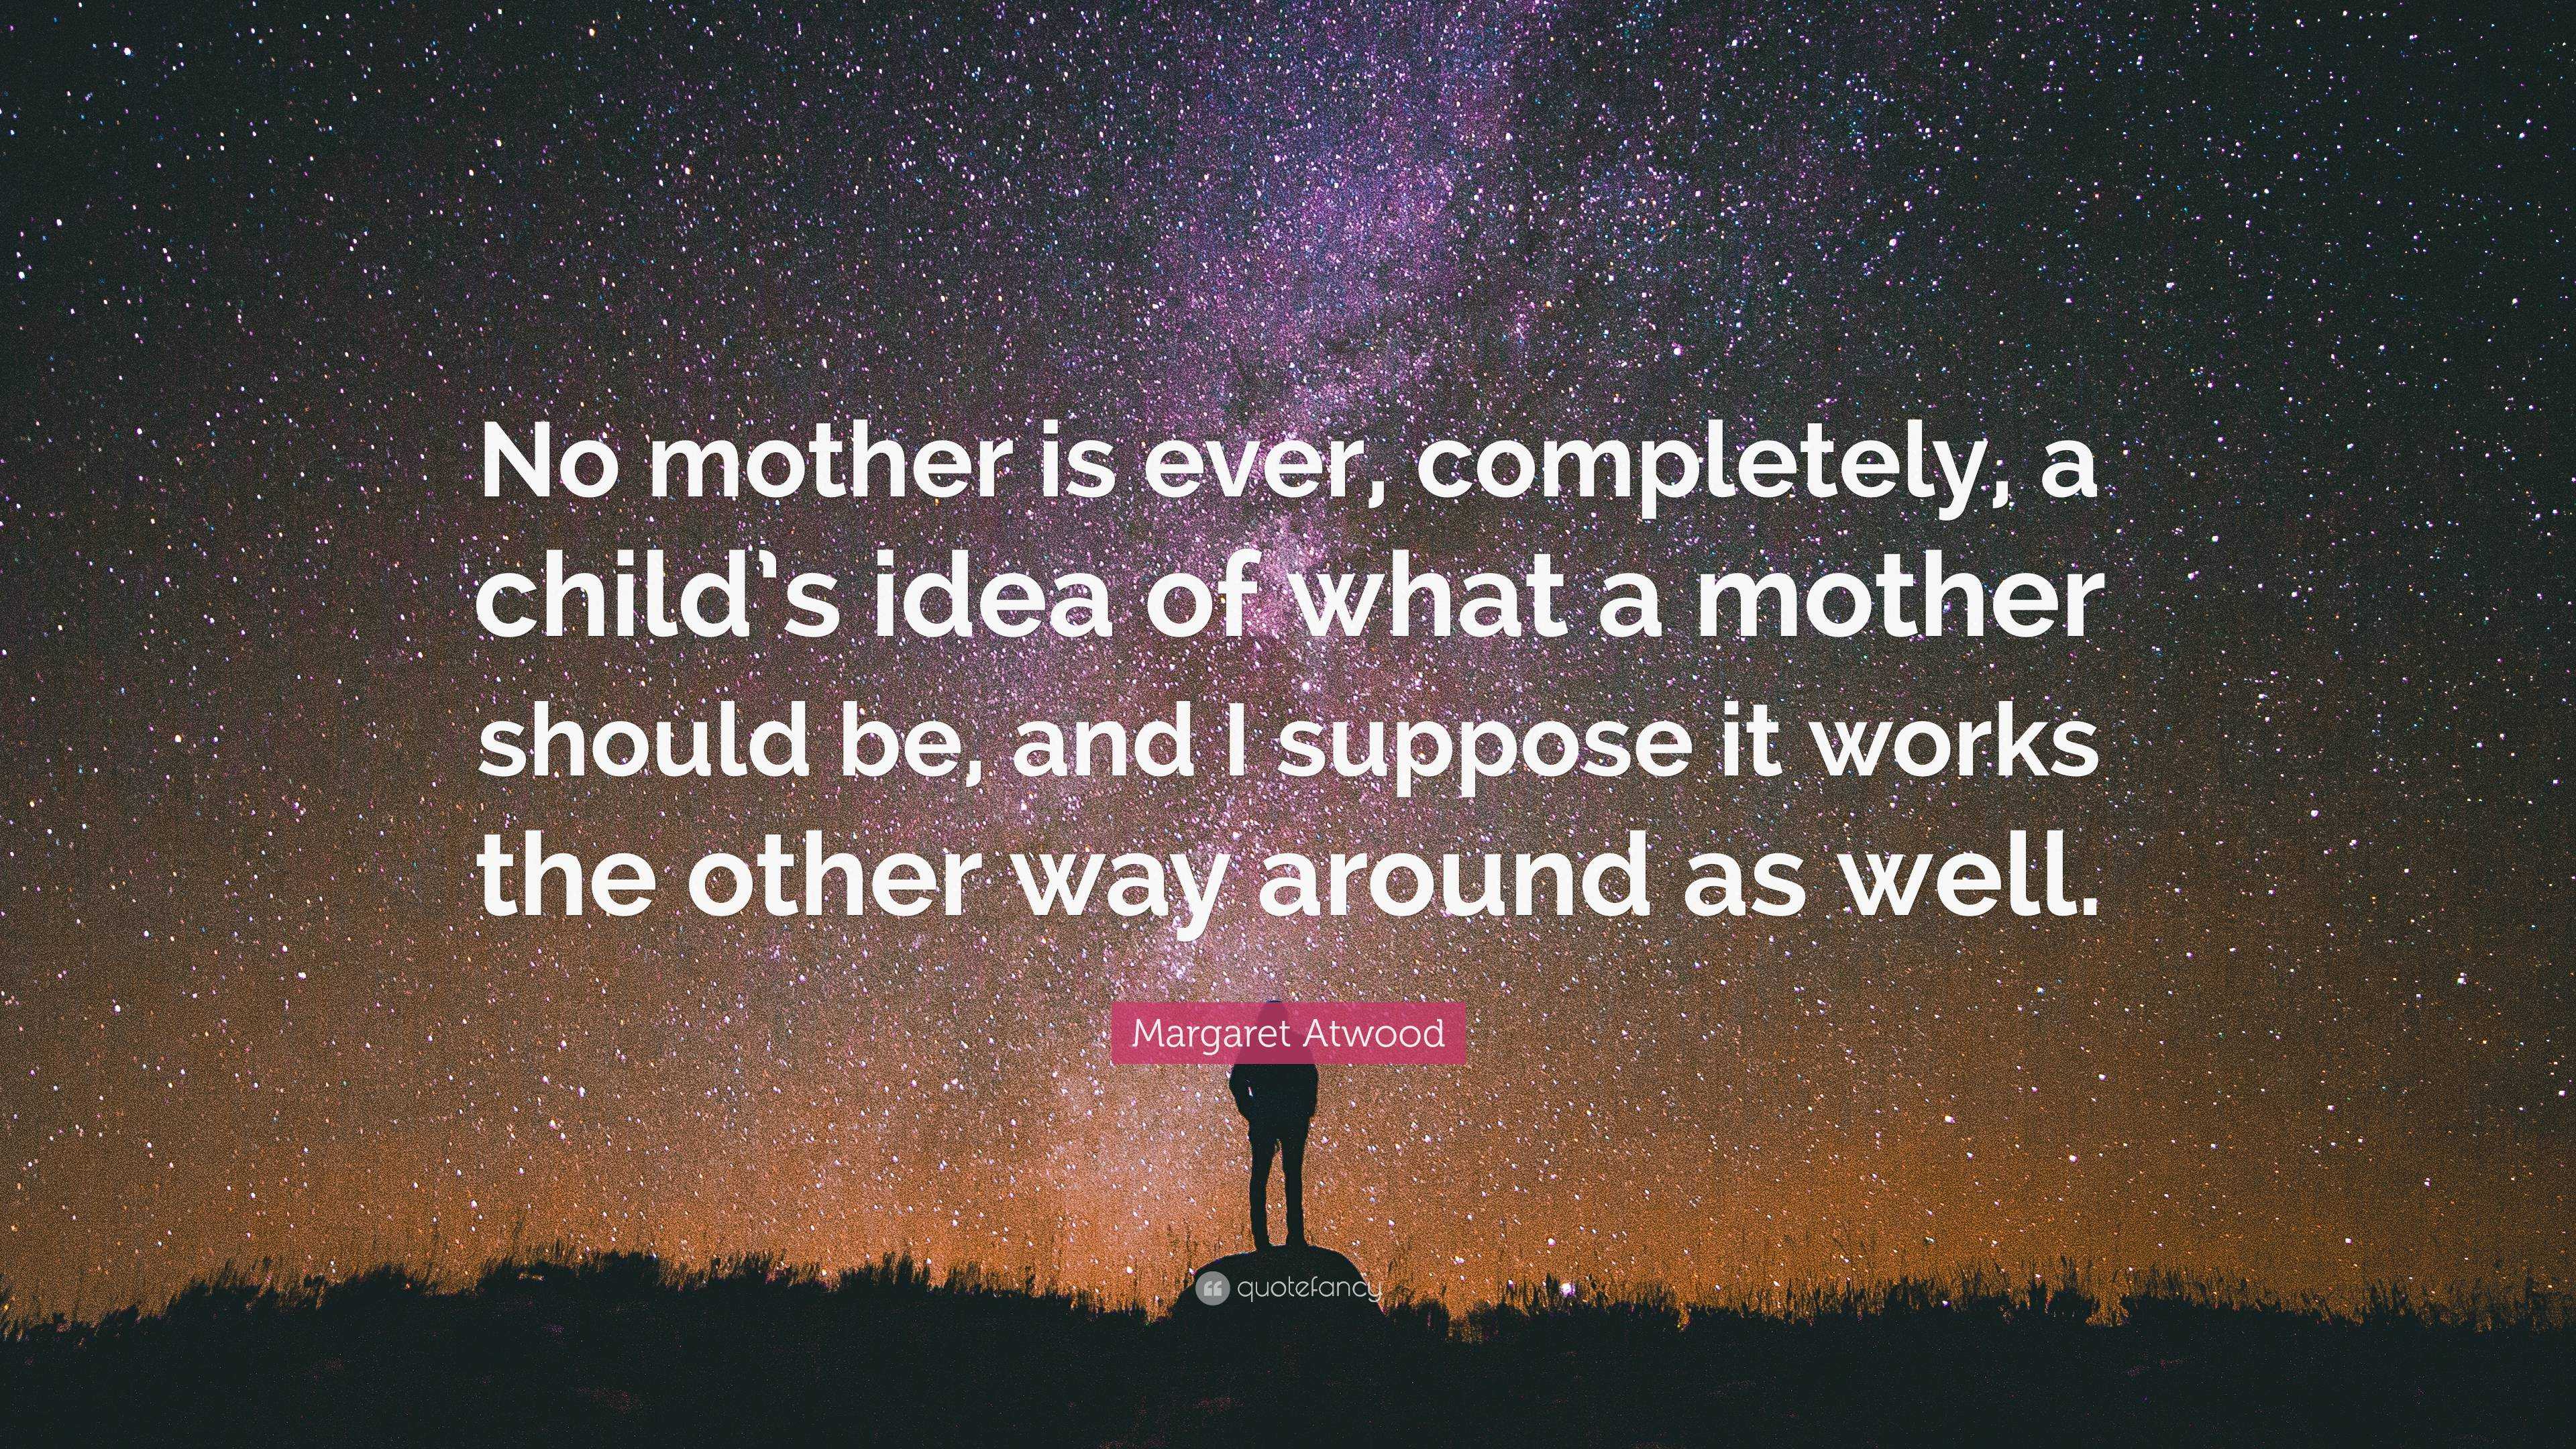 Margaret Atwood Quote: “No mother is ever, completely, a child’s idea ...